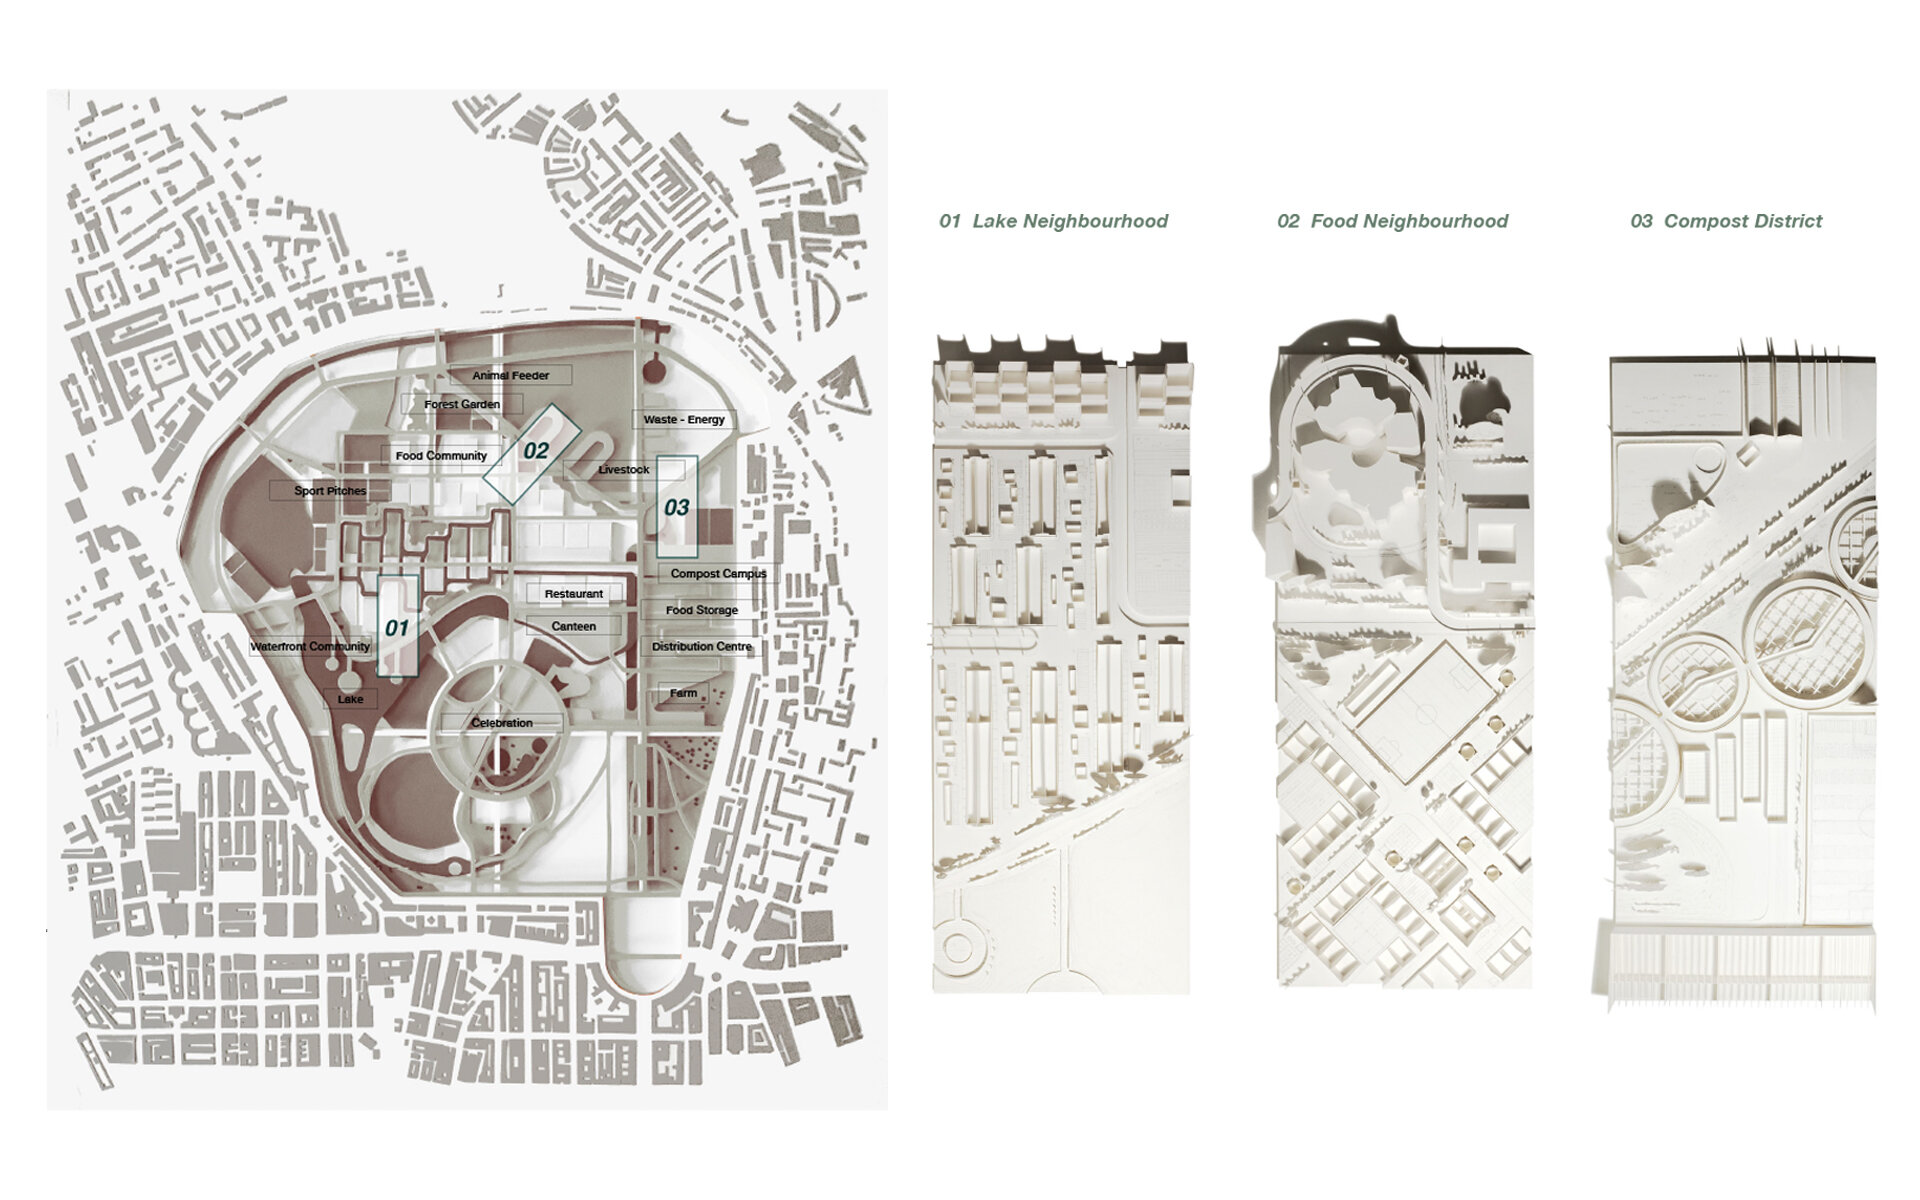 Productive Landscape - Regent’s Park Food Community_Meiying Hong_MArch Year 5, Bartlett School of Architecture, UCL 5.jpg